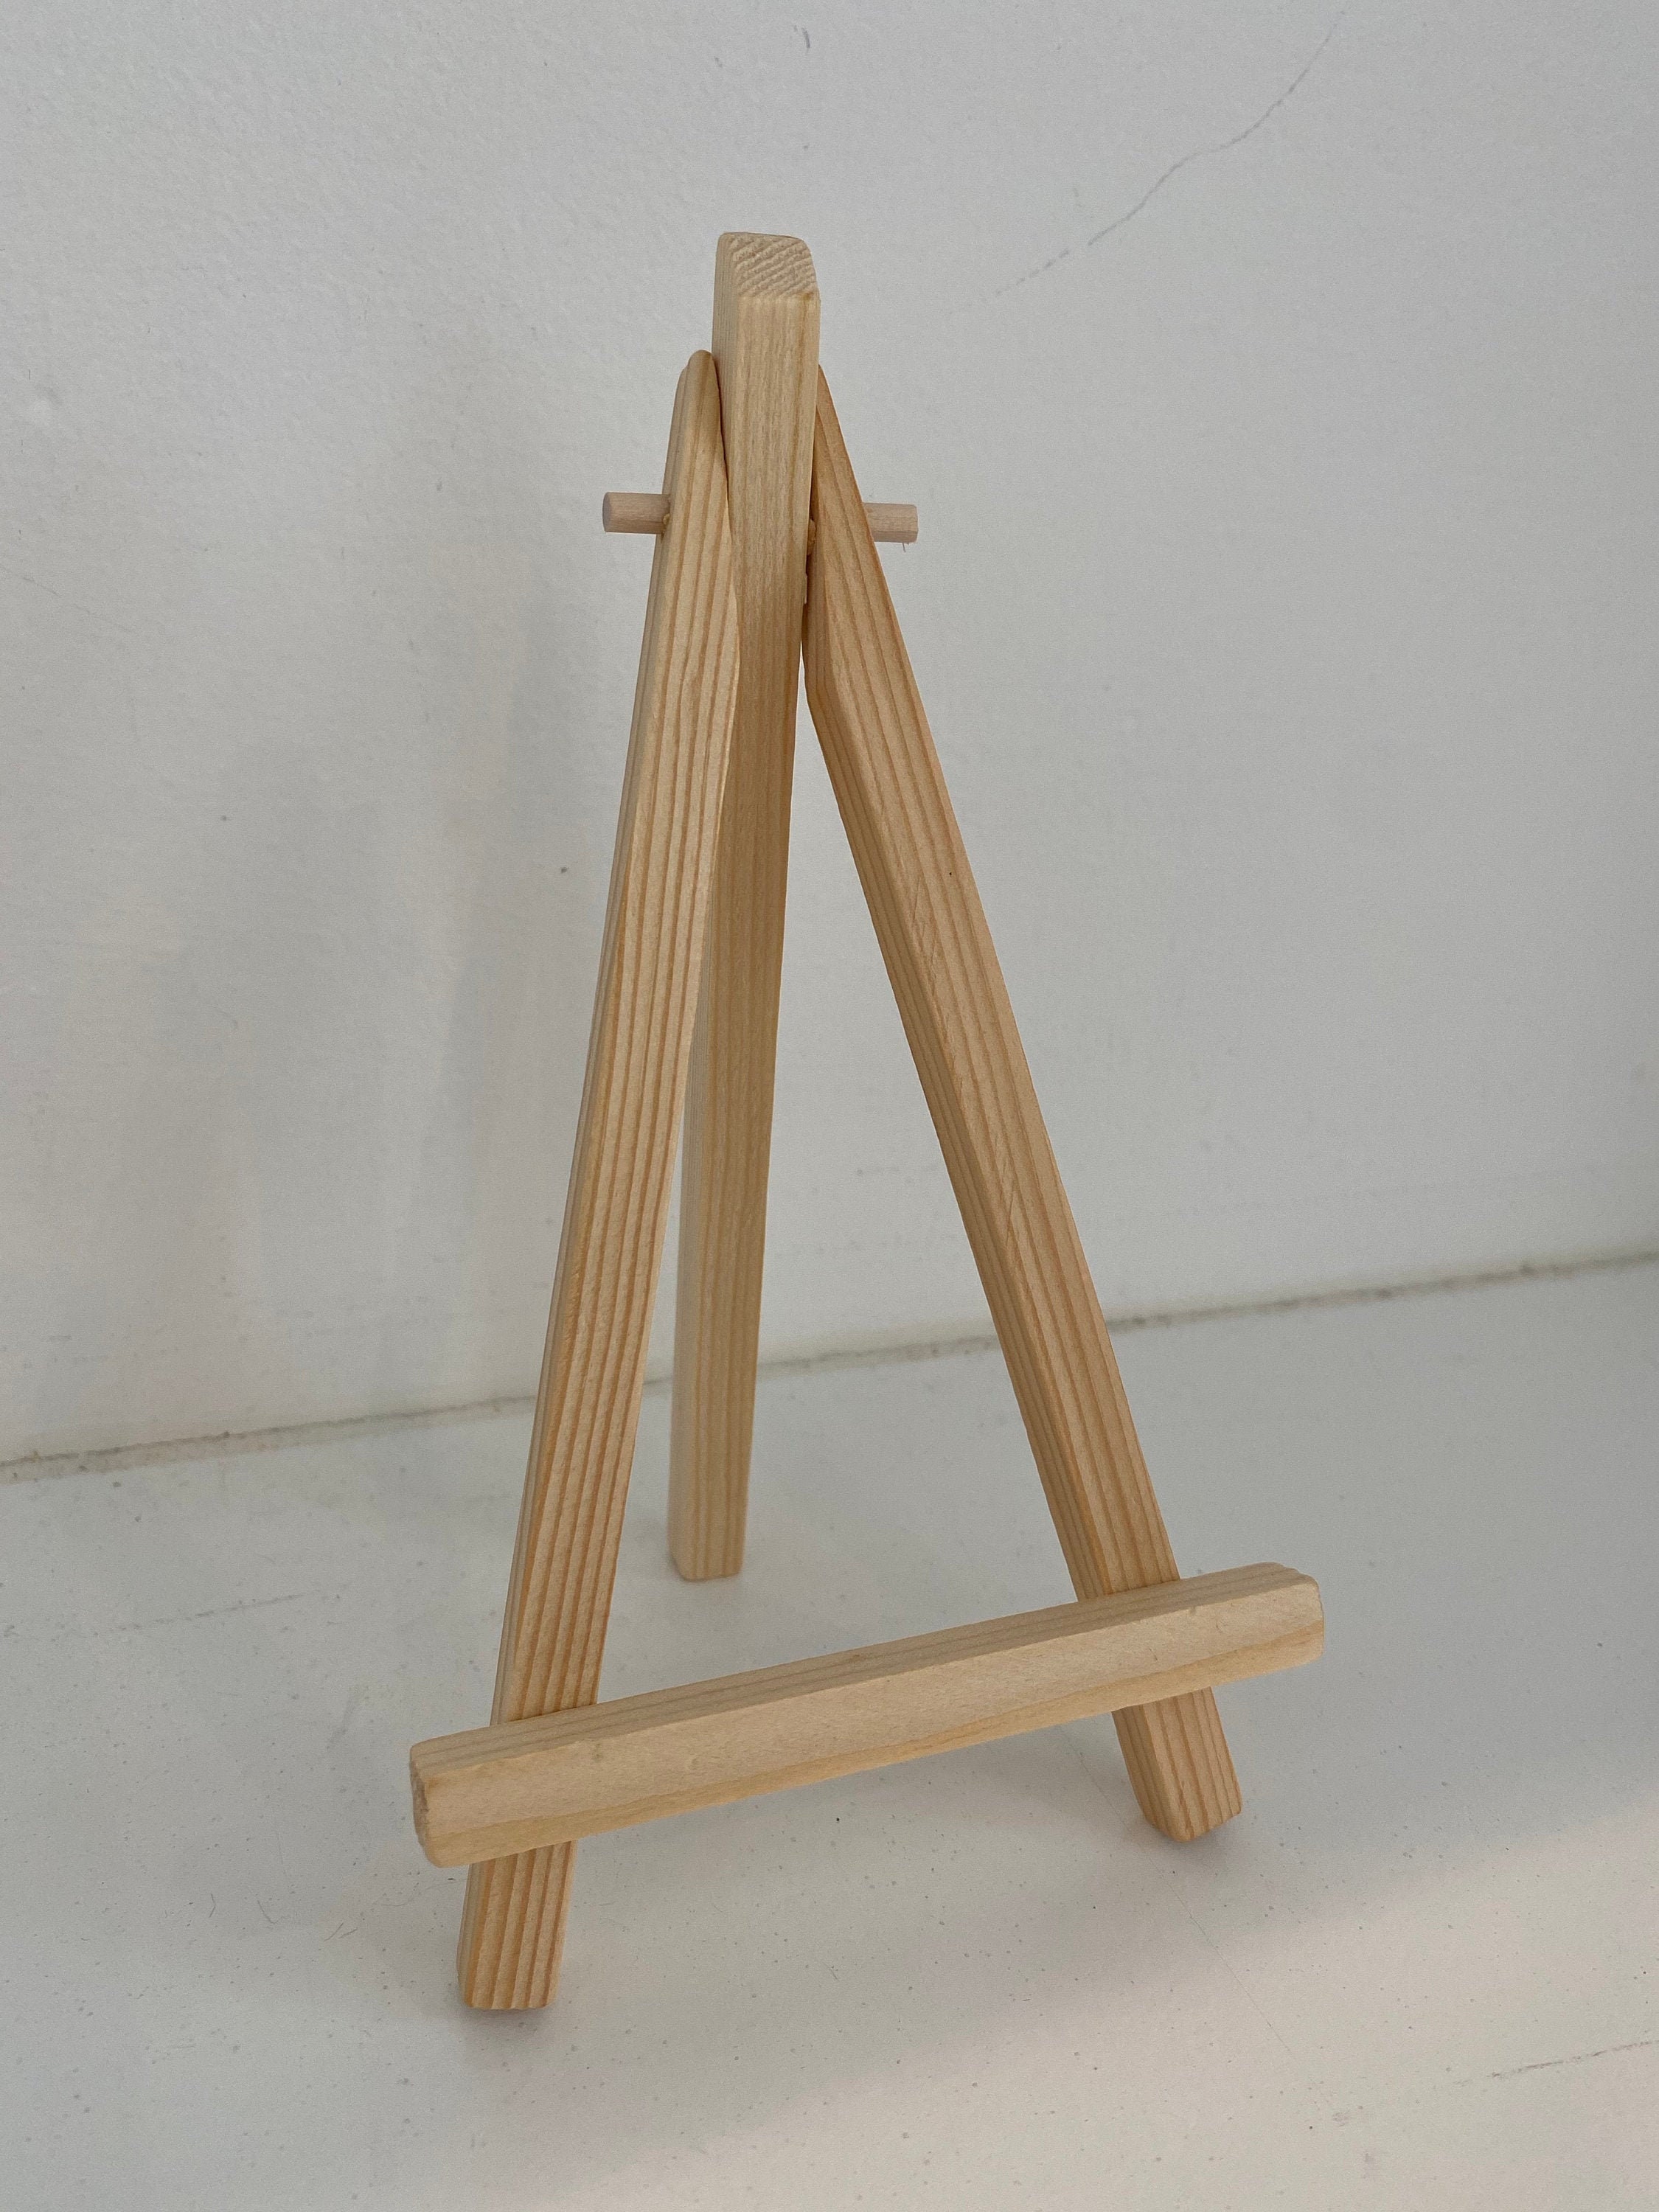 Mini Art Easel, Wooden Triangle Easels for Displaying Embroidery Hoops,  Embroidery Stand, Freestanding Mini Easel 